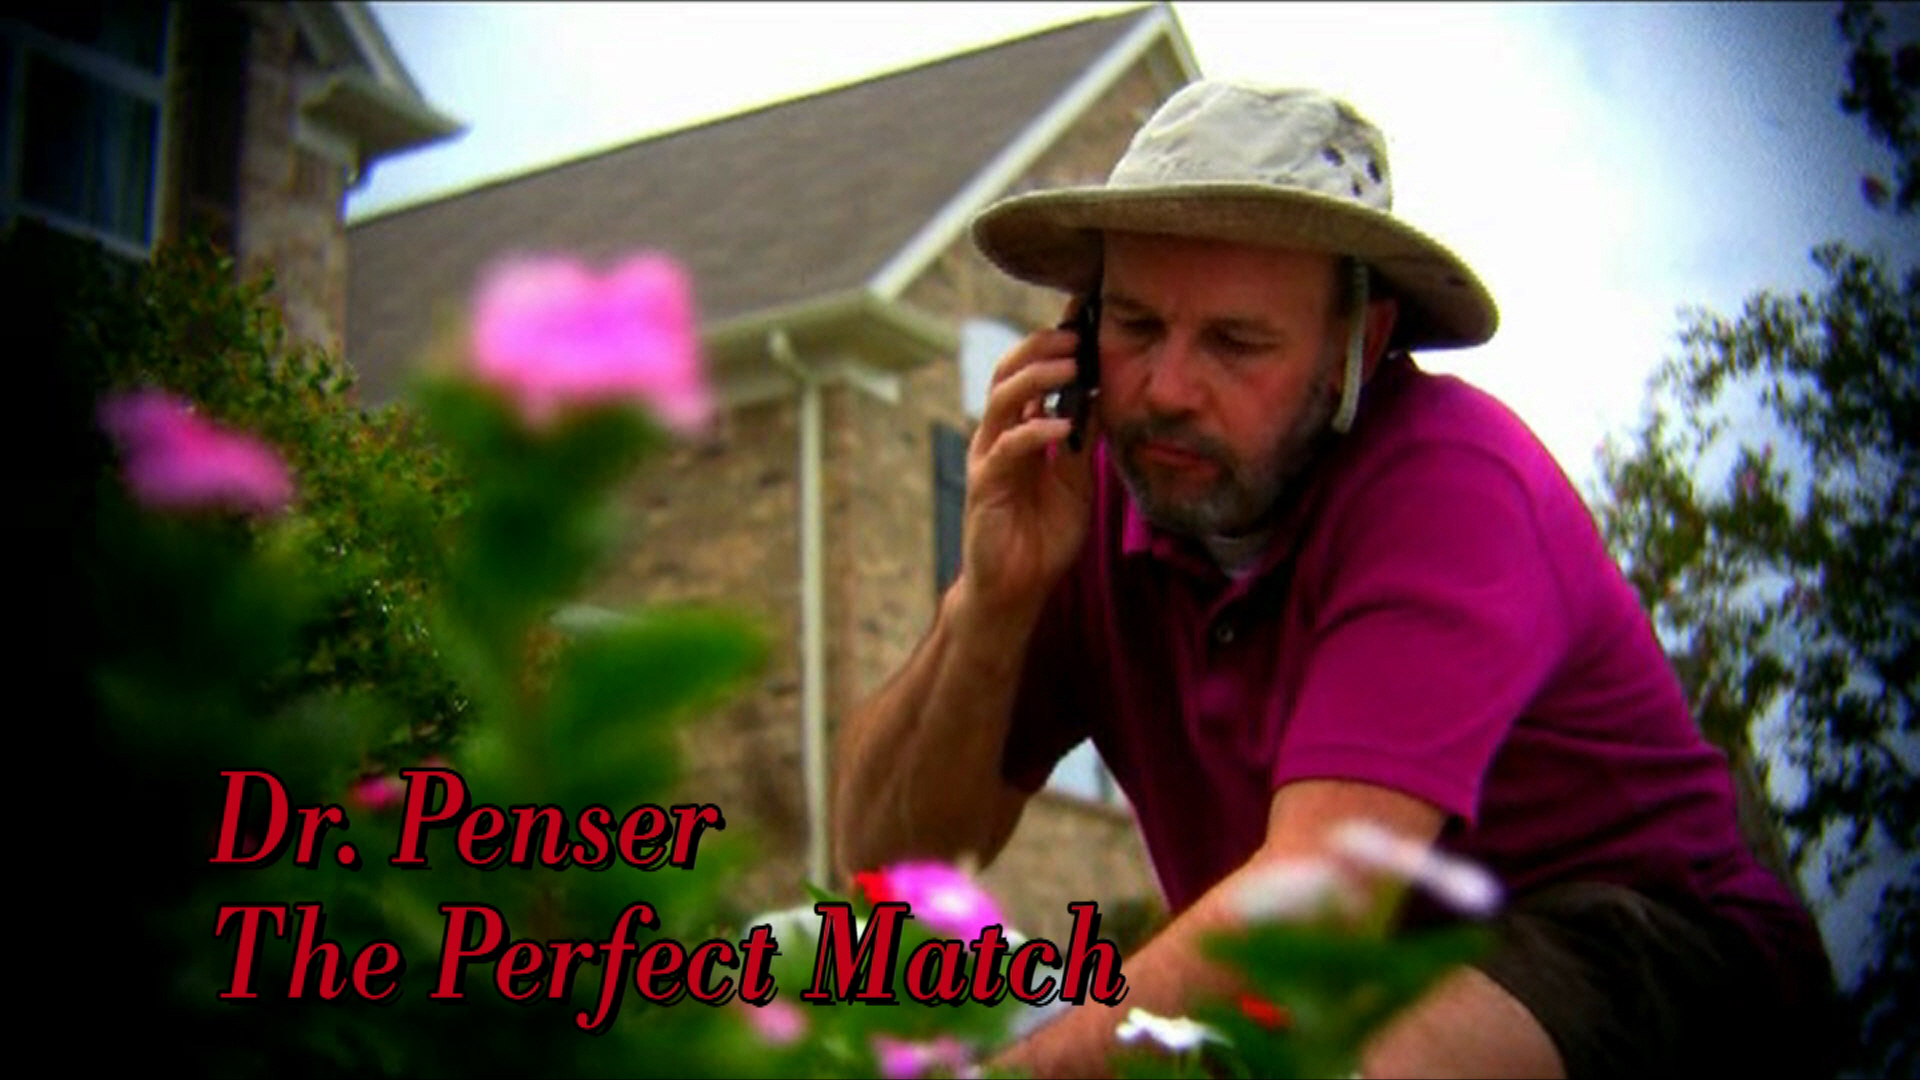 Sitcom Pilot, The Perfect Match Supporting/Dr. Penser